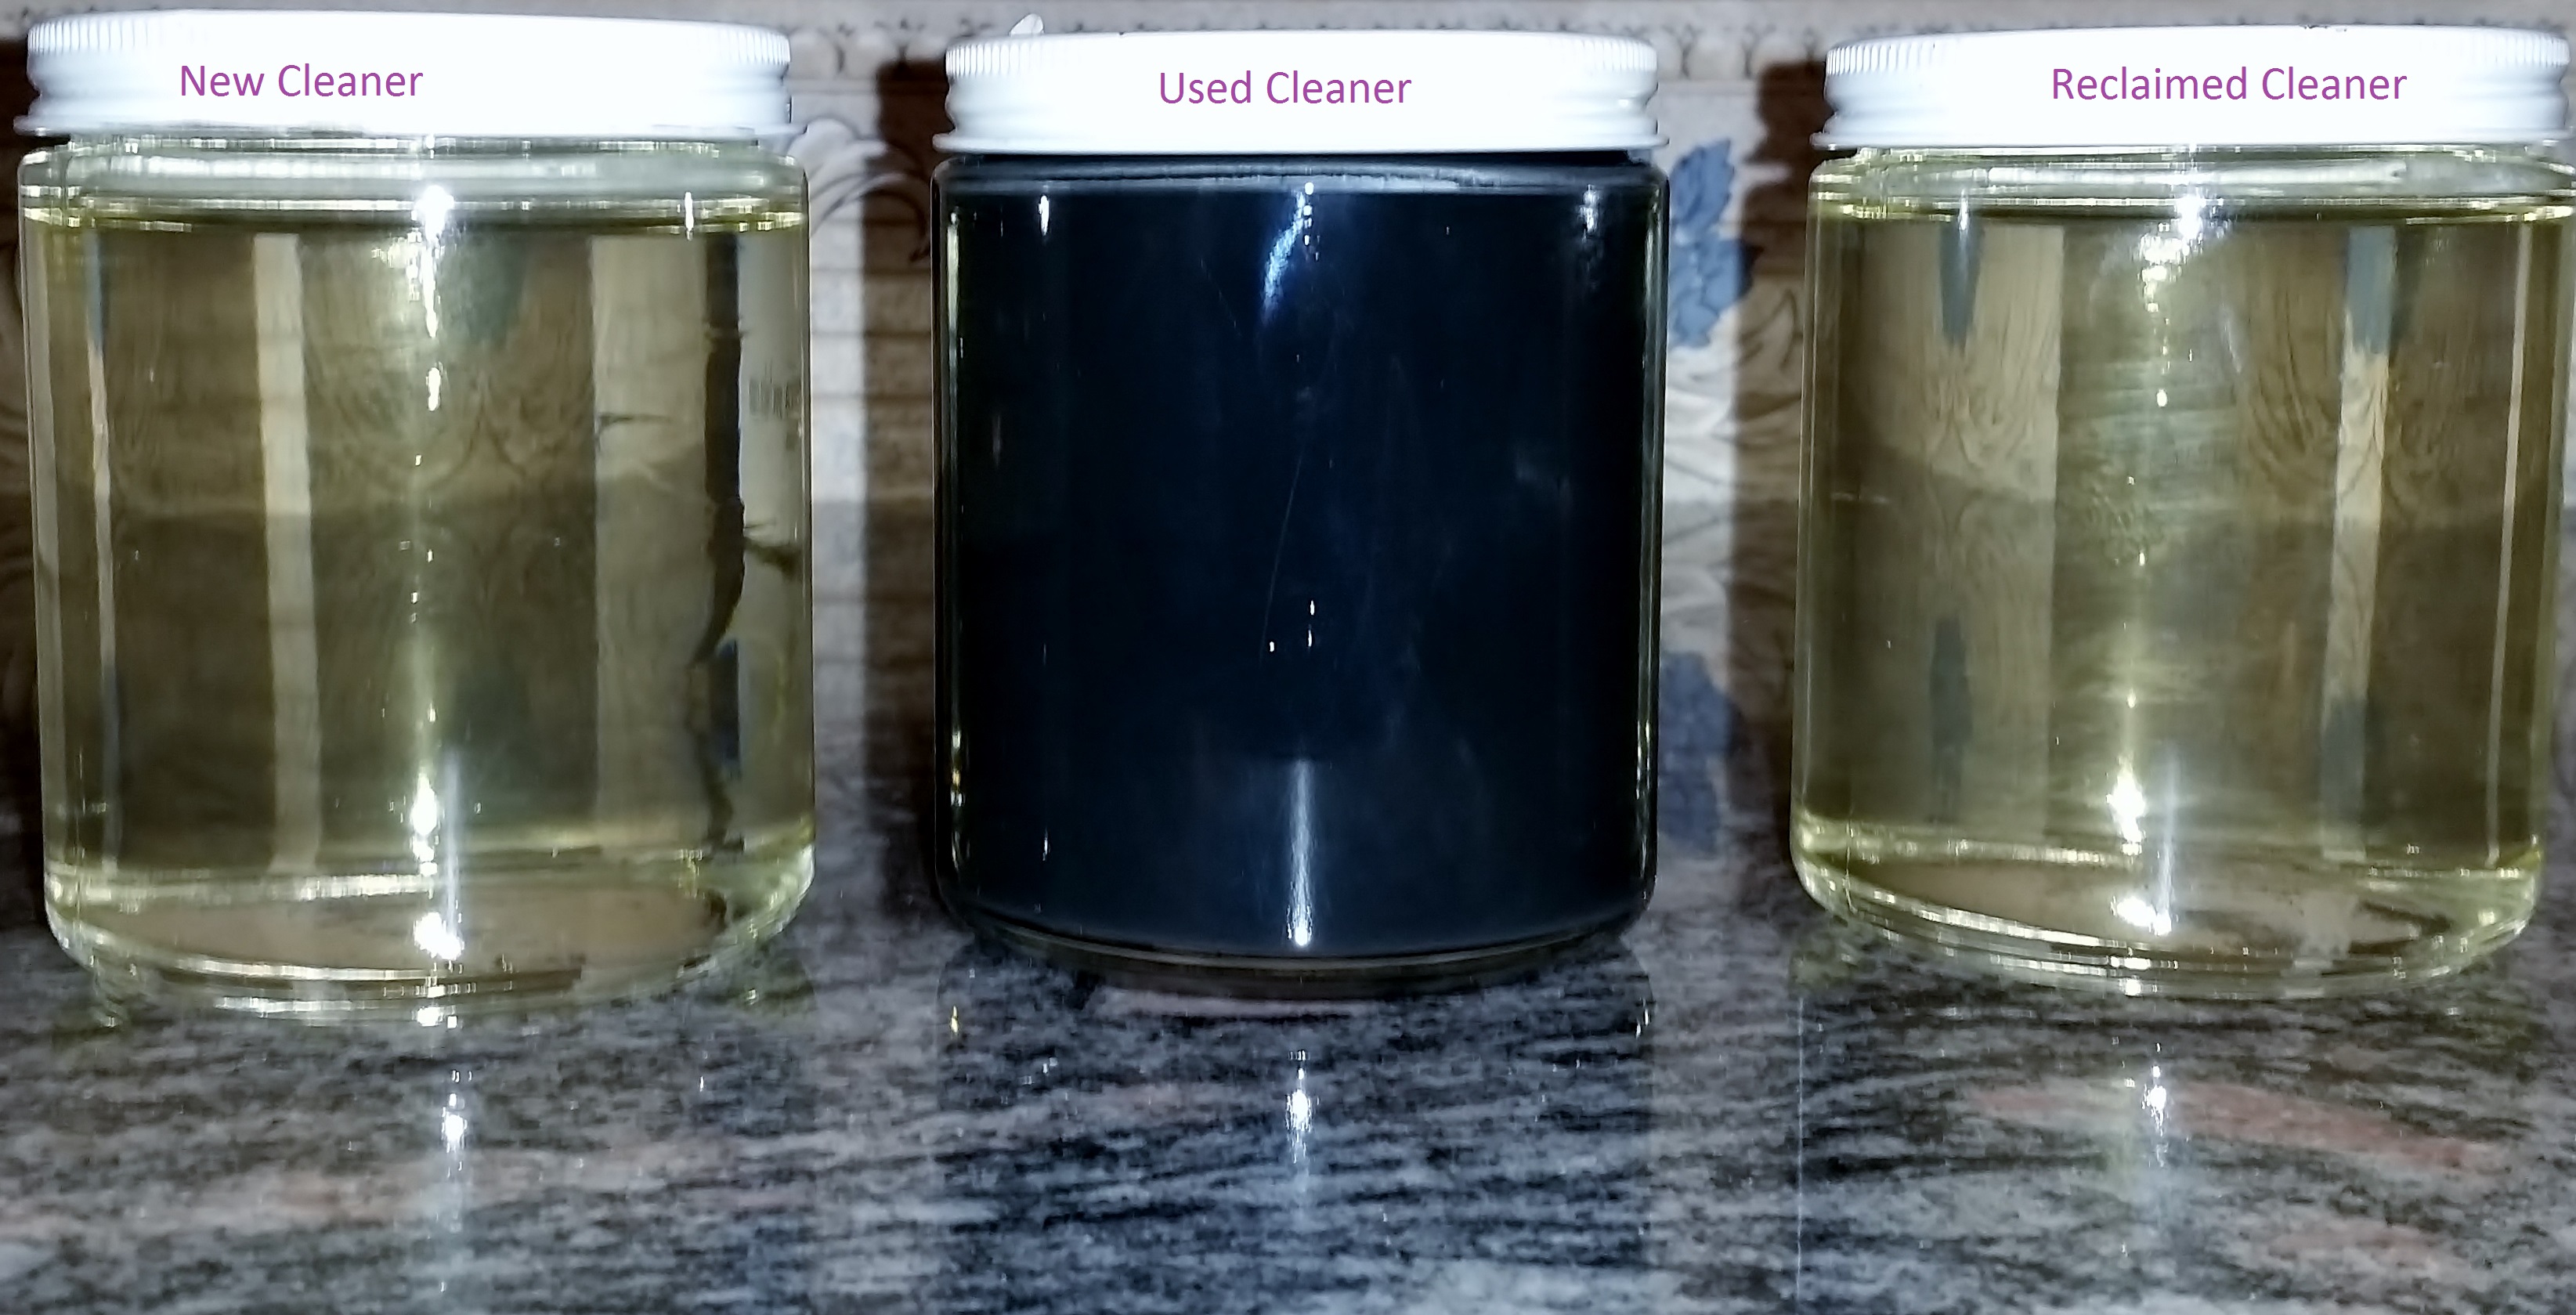 New Cleaner, Used Cleaner, Reclaimed Cleaner